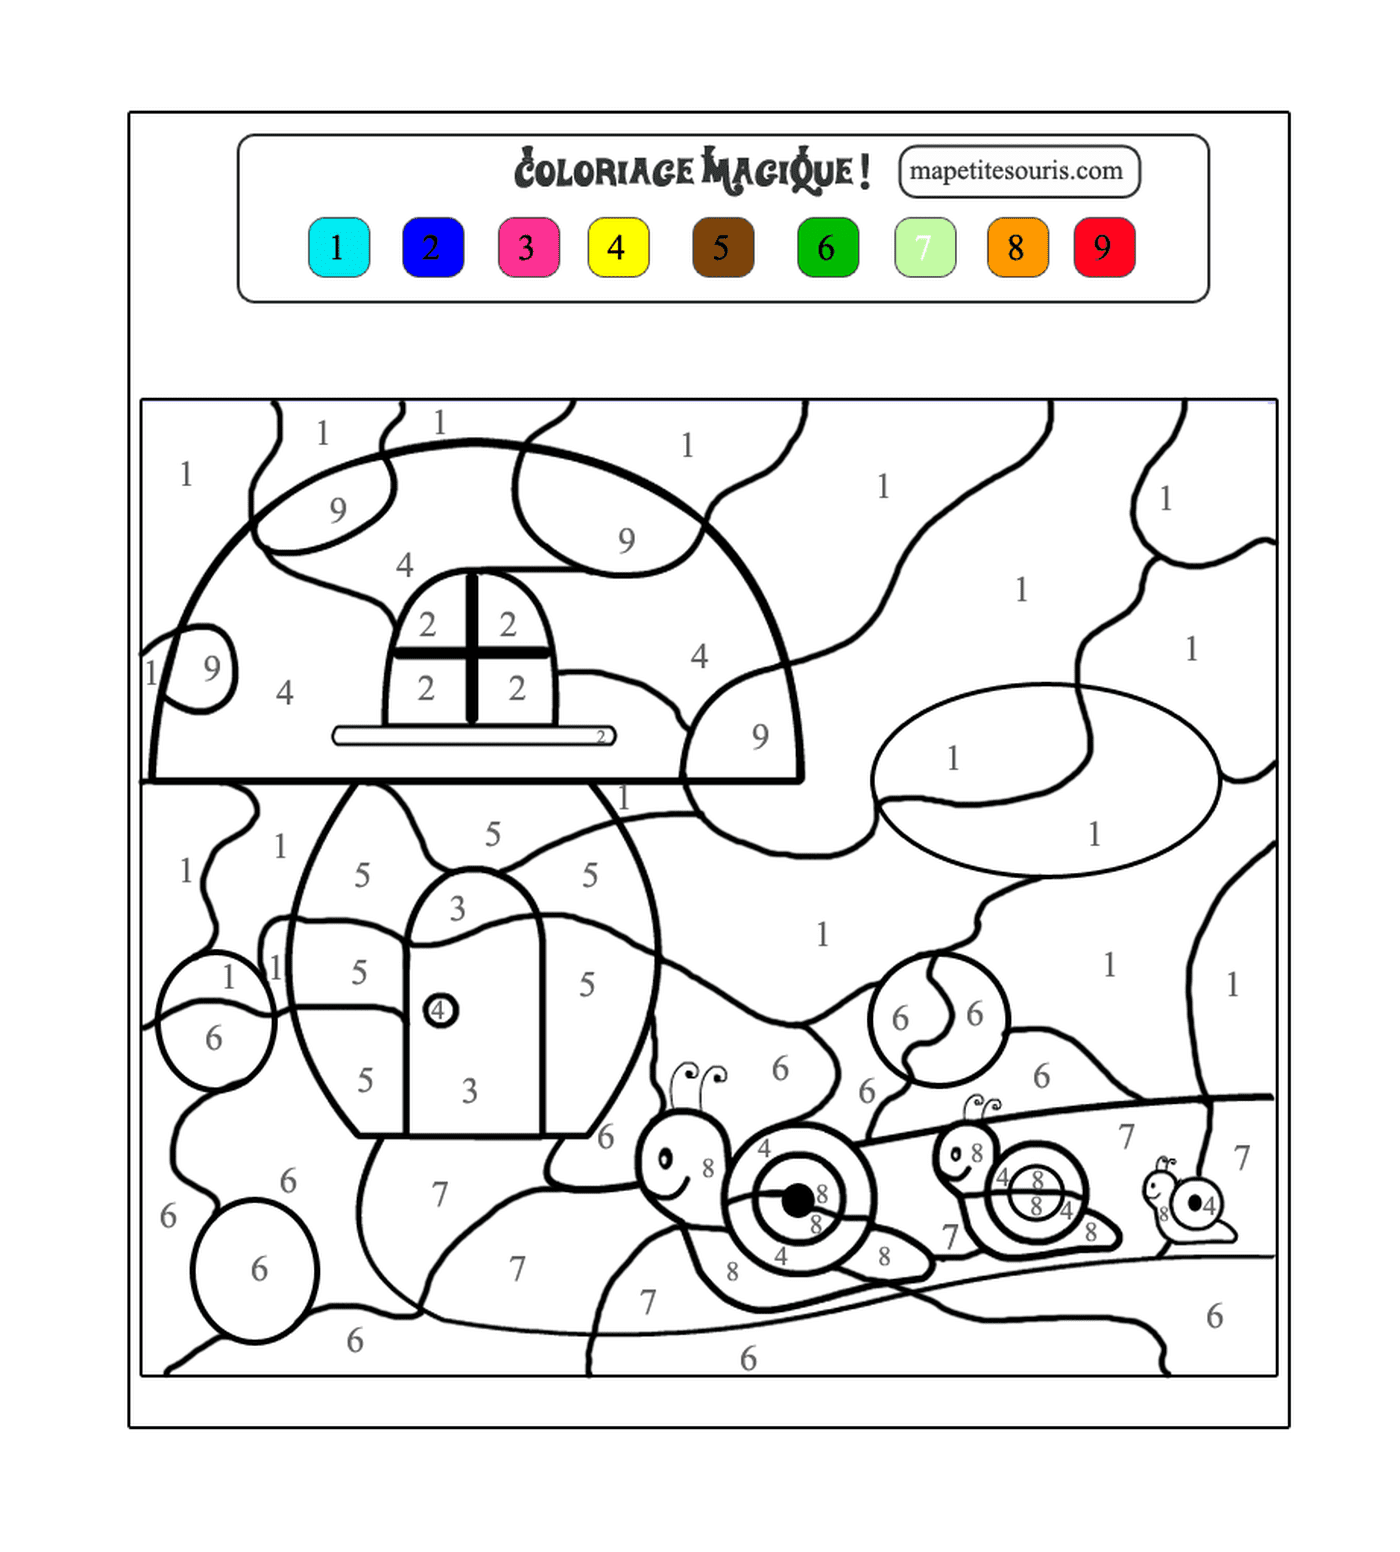  Magic coloring with a house 